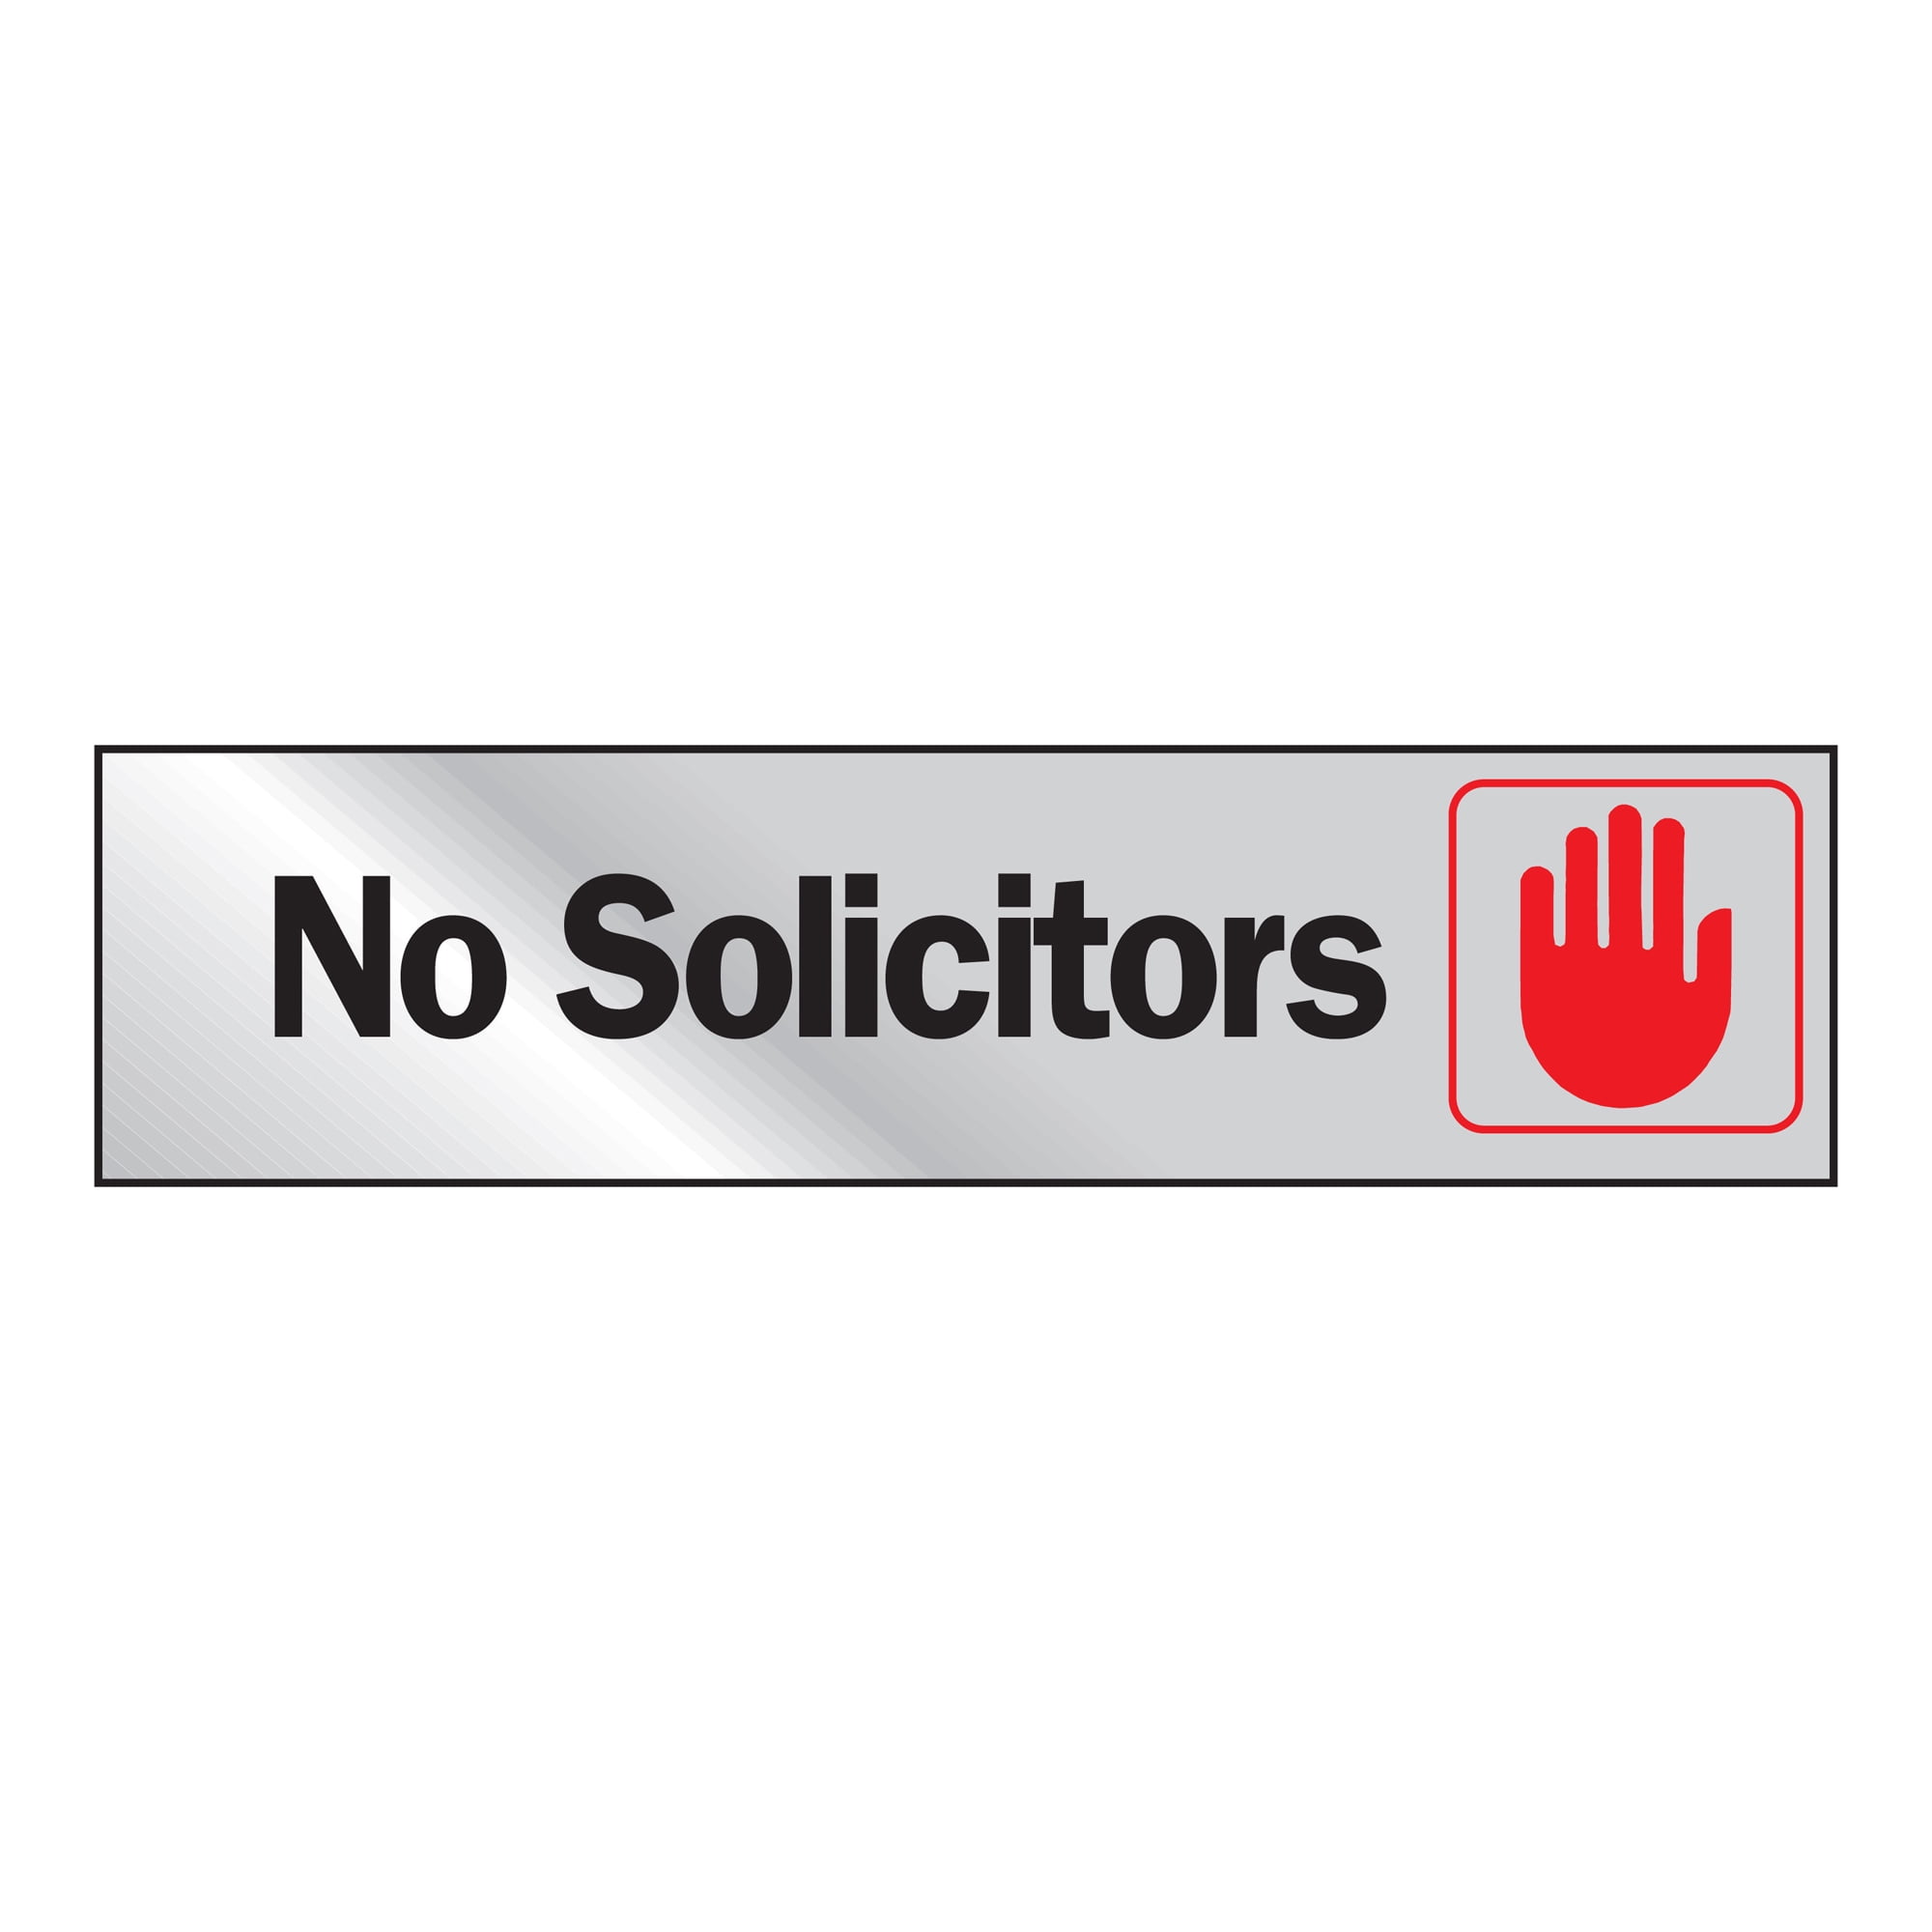 Details about   No Soliciting Vinyl Decal Die Cut Sticker V1 Storefront Business Office Sign